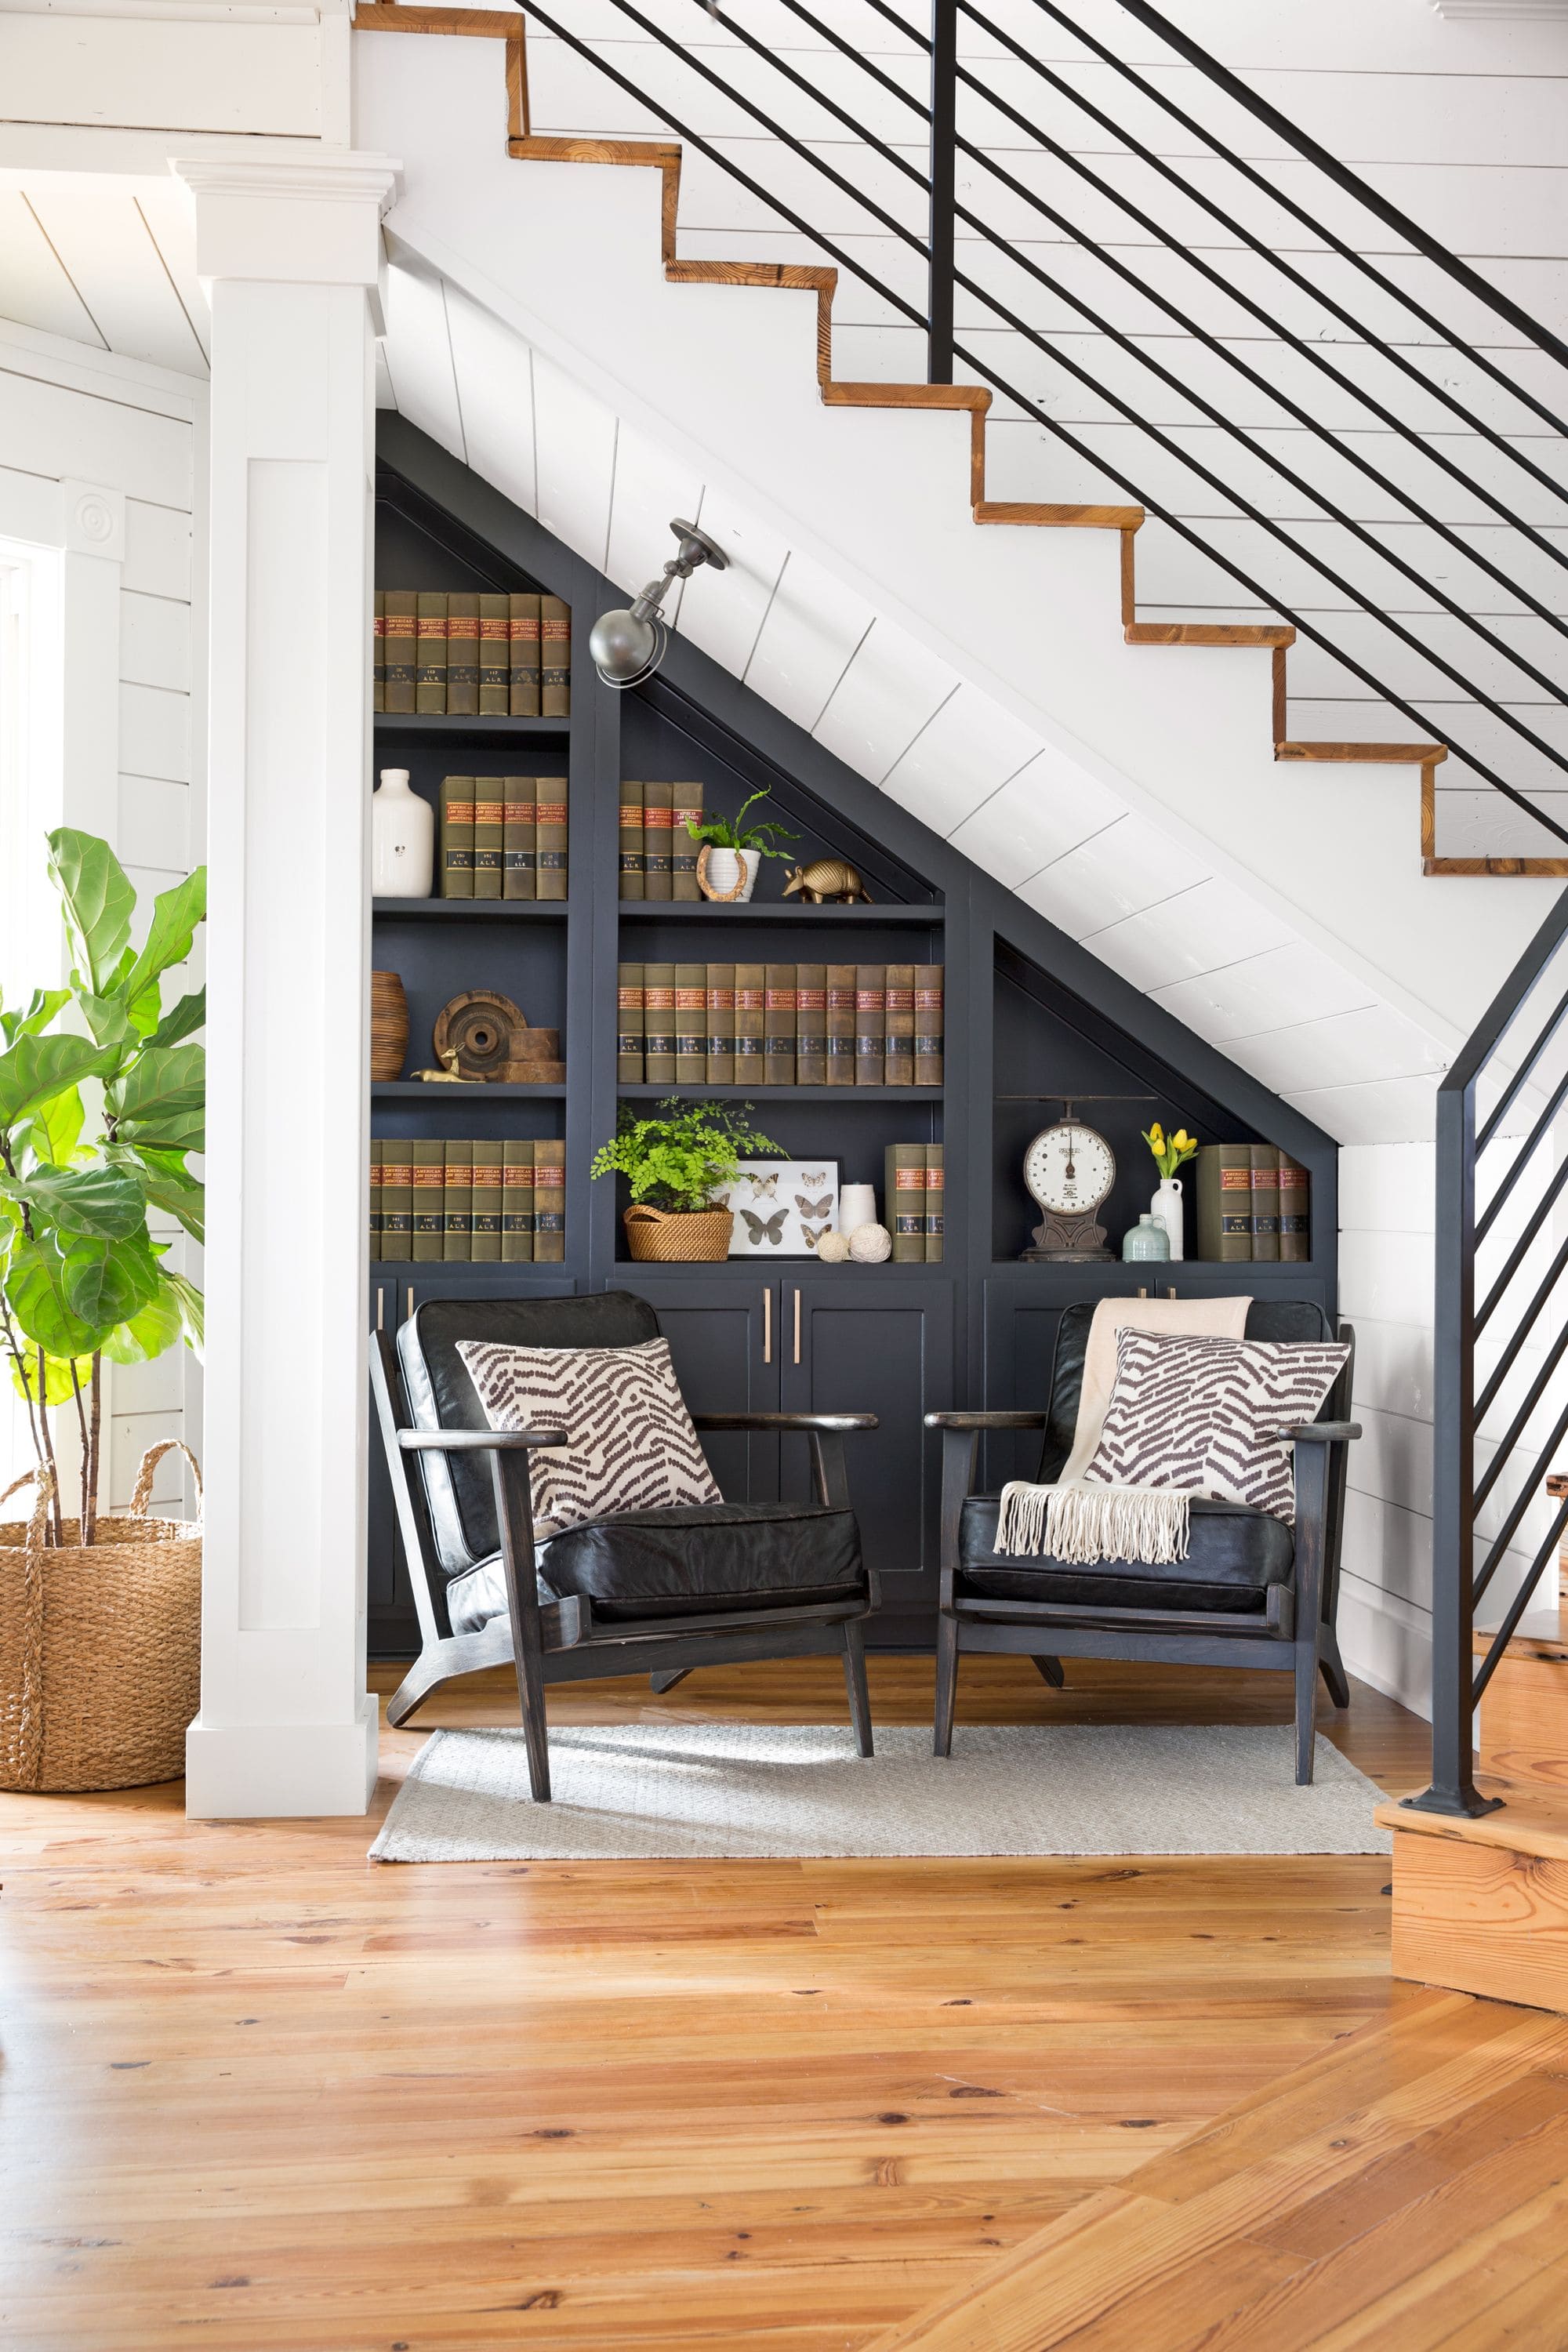 30 awesome understair ideas to add to your bag - 121